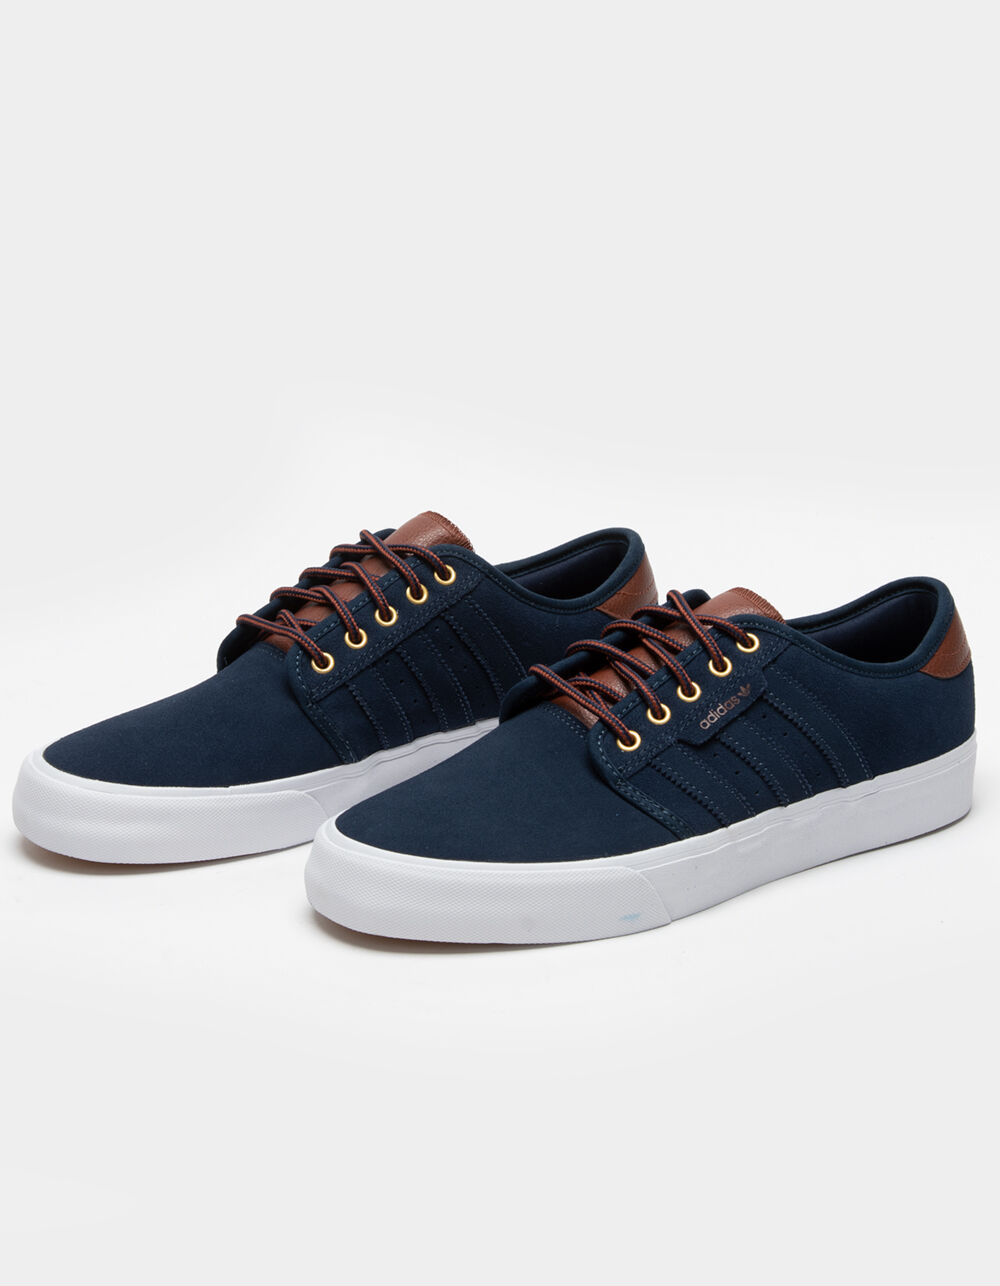 Seeley Shoes NAVY | Tillys